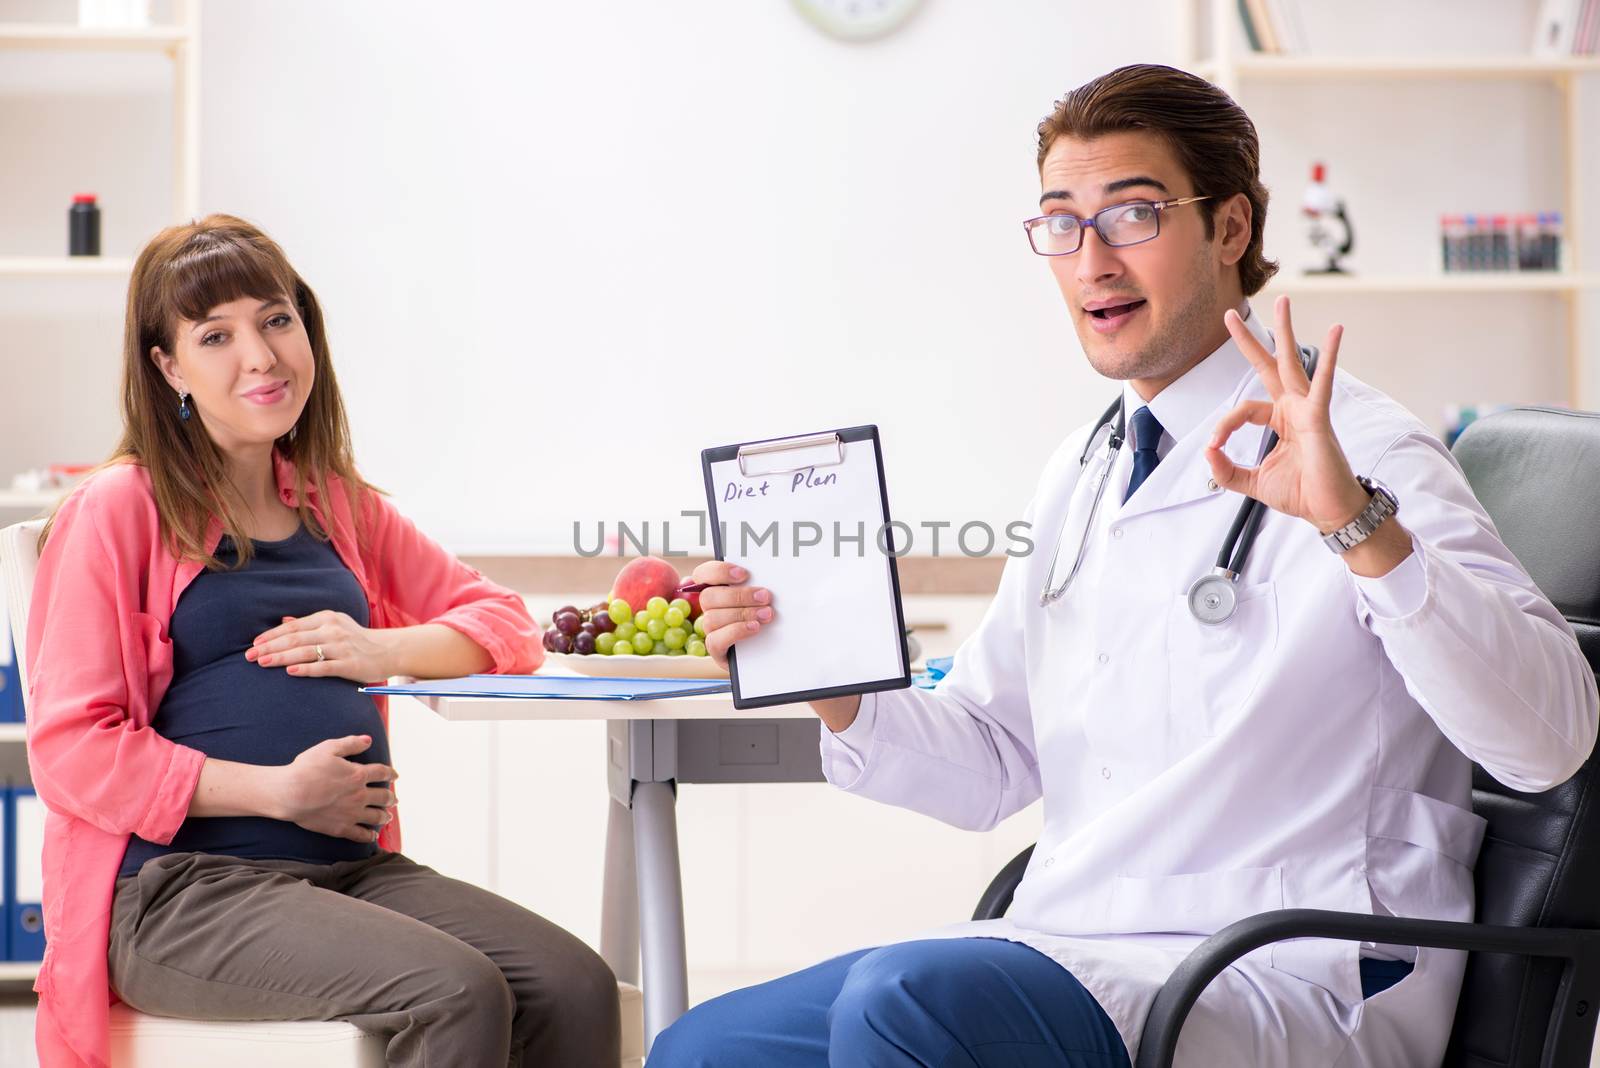 Pregnant woman visiting doctor discussing healthy diet by Elnur